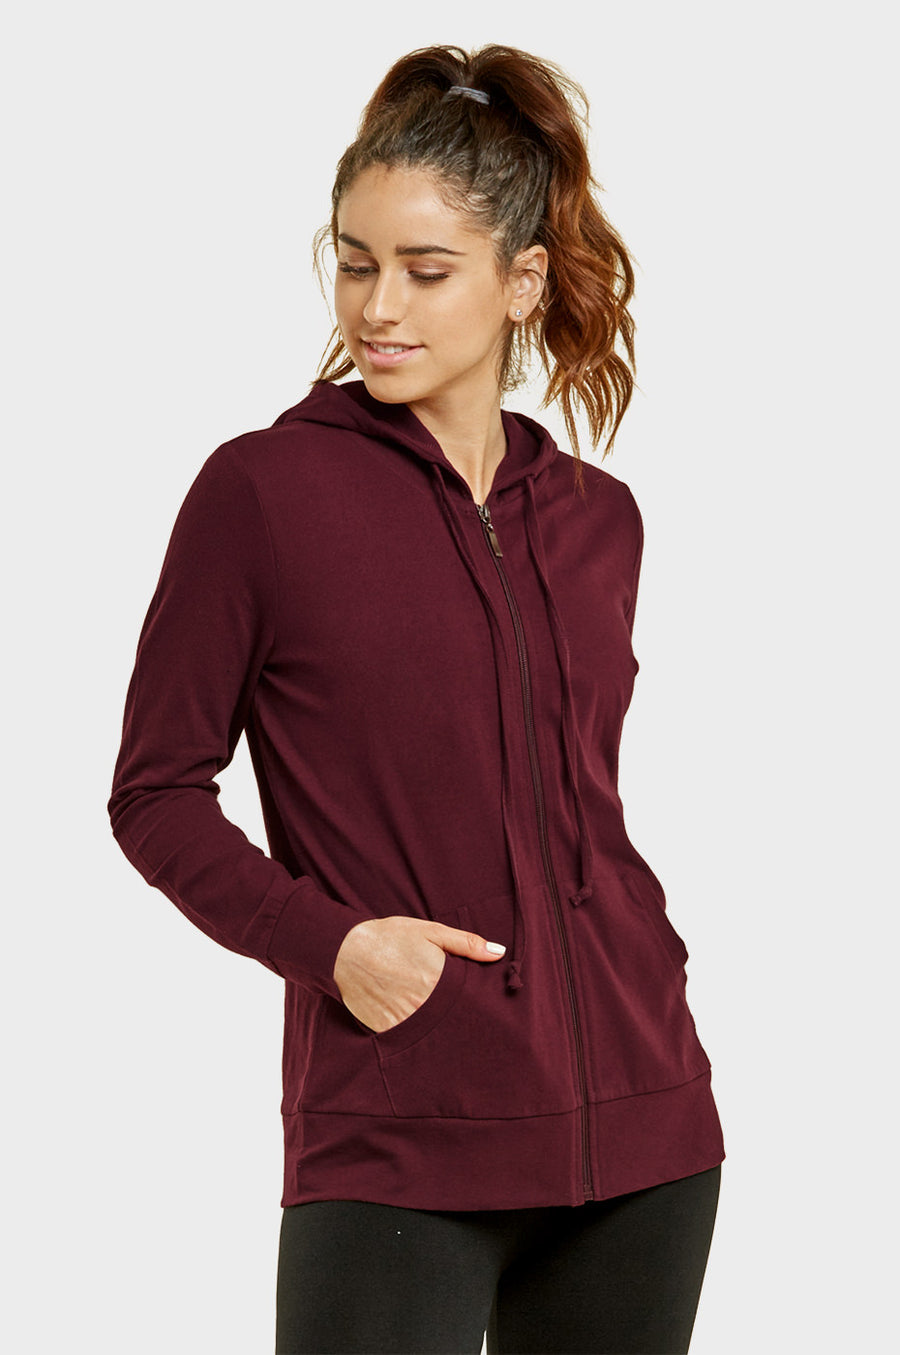 Sofra Women's Lightweight Cotton Blend Long Sleeve Zip Up Thin Hoodie Jacket - image 3 of 4